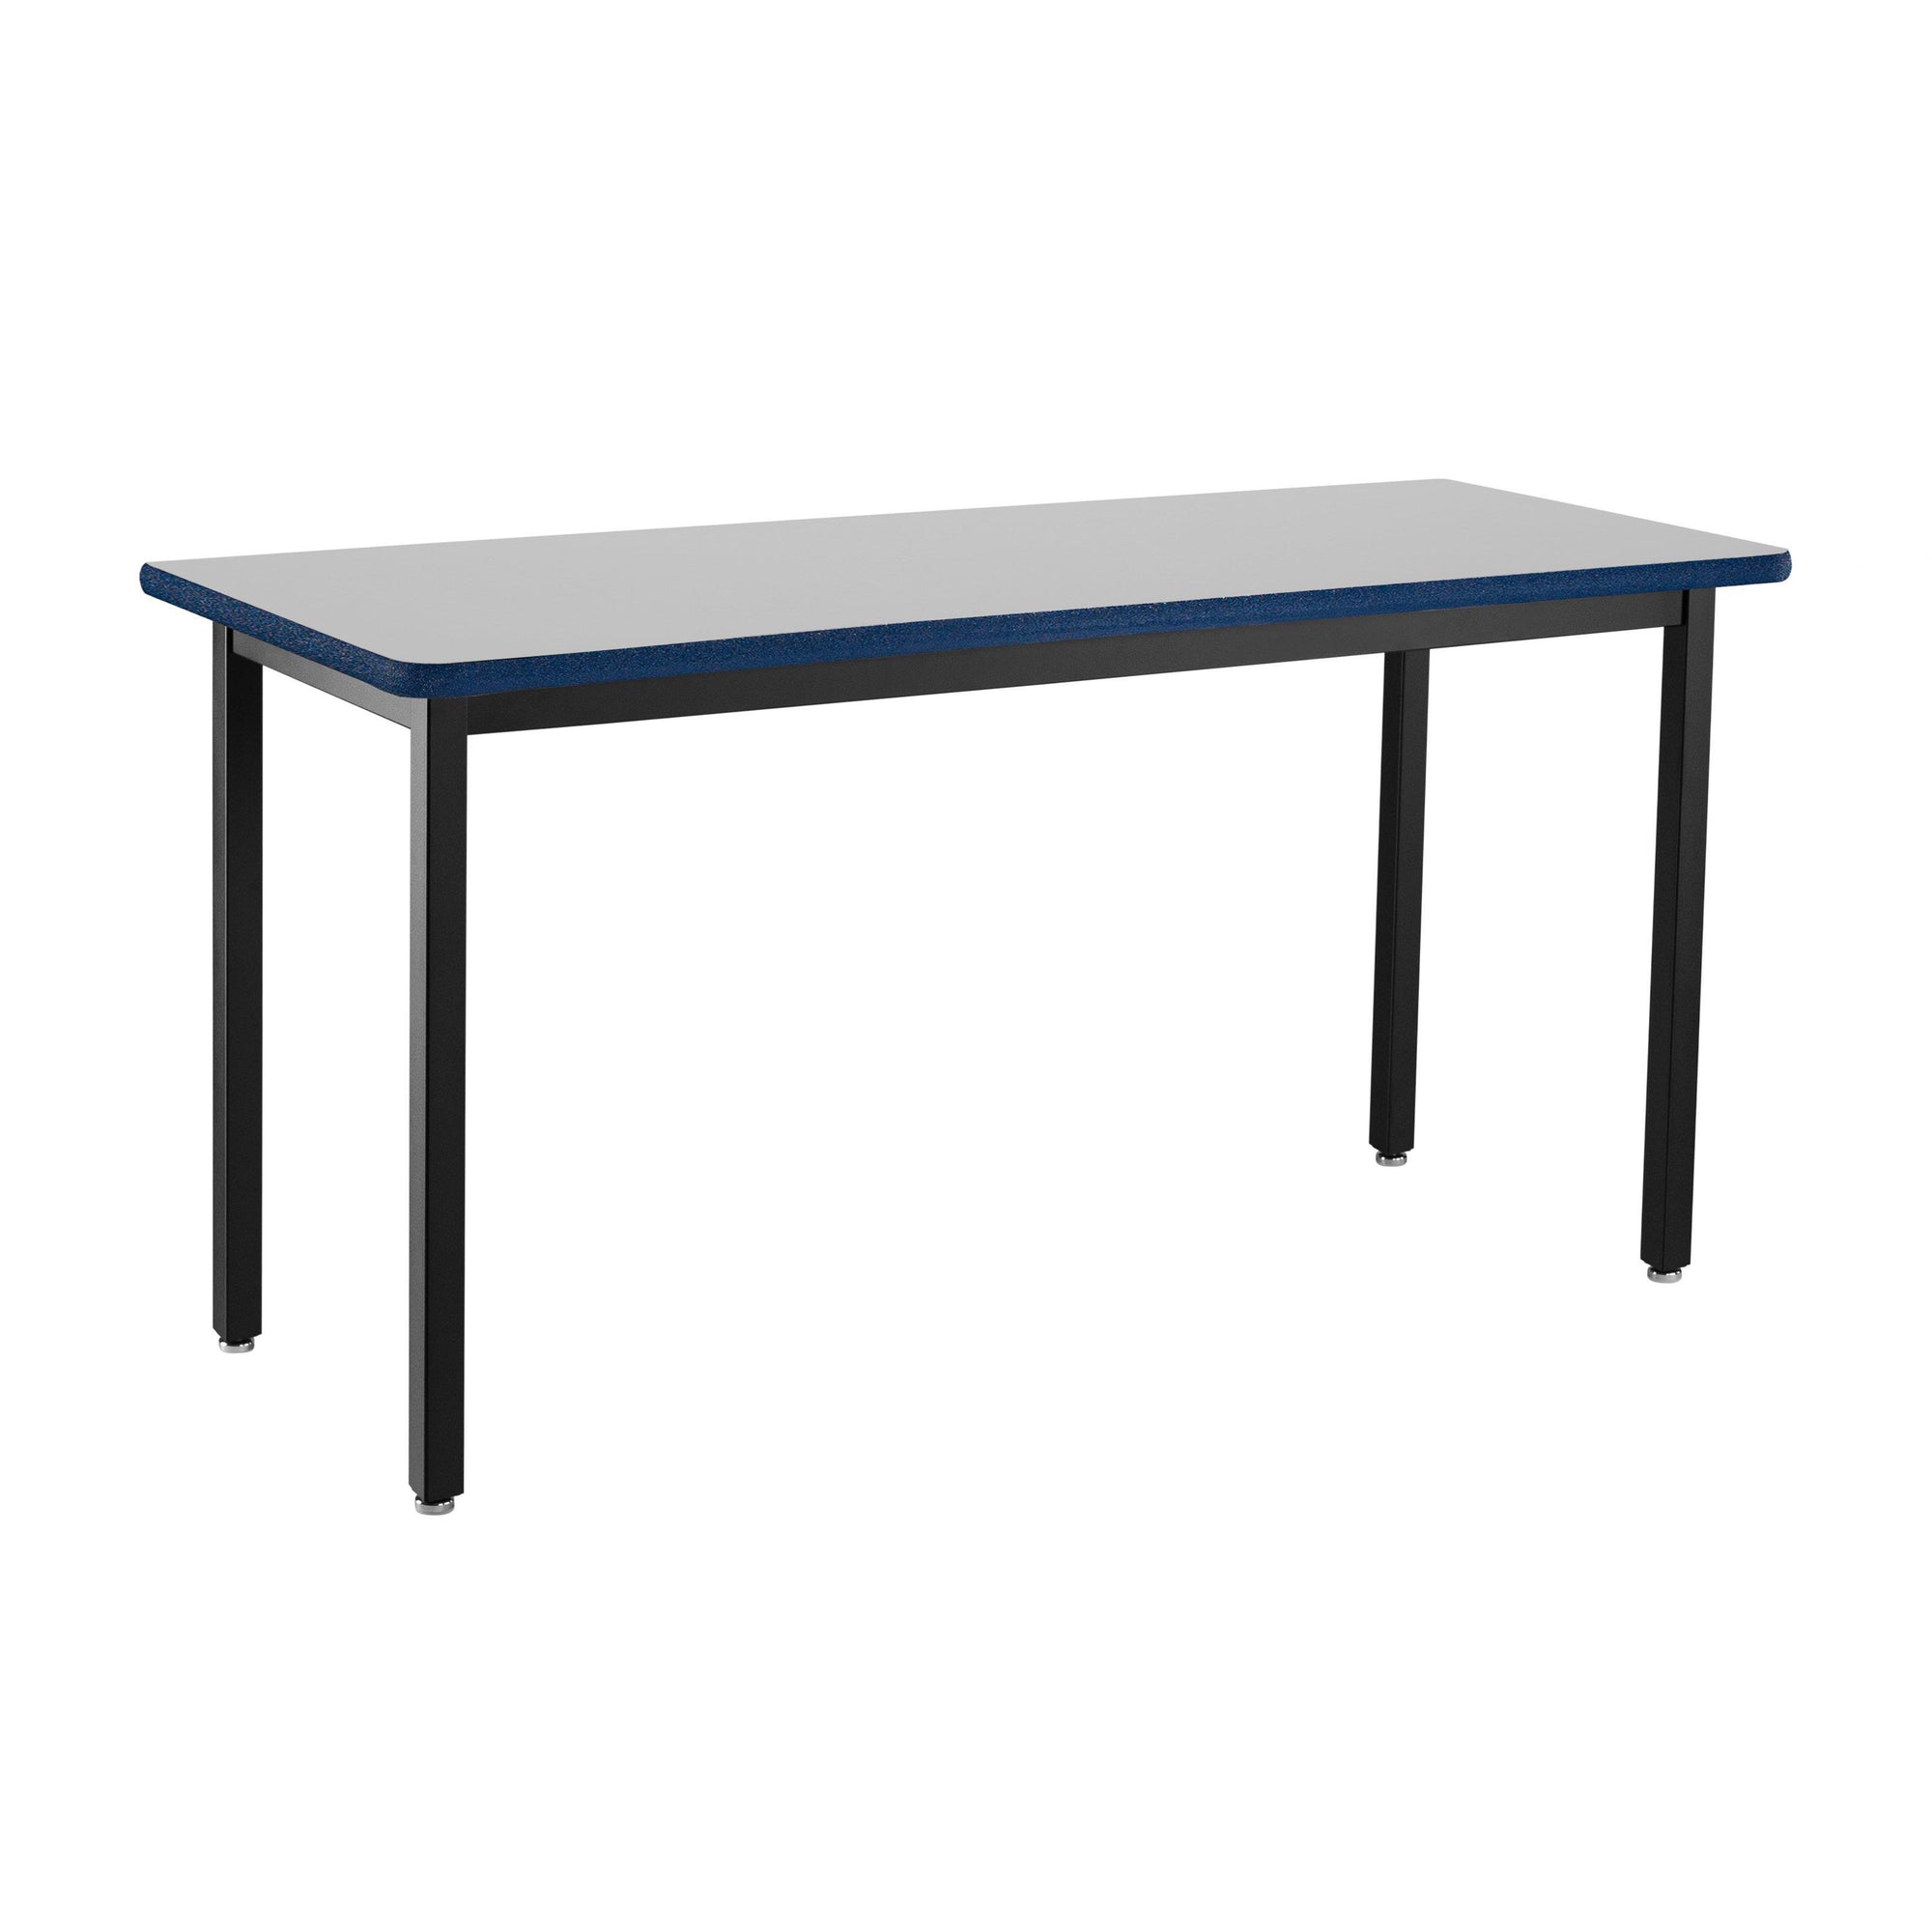 Heavy-Duty Fixed Height Utility Table, Black Frame, 30" x 60", Supreme High-Pressure Laminate Top with Black ProtectEdge